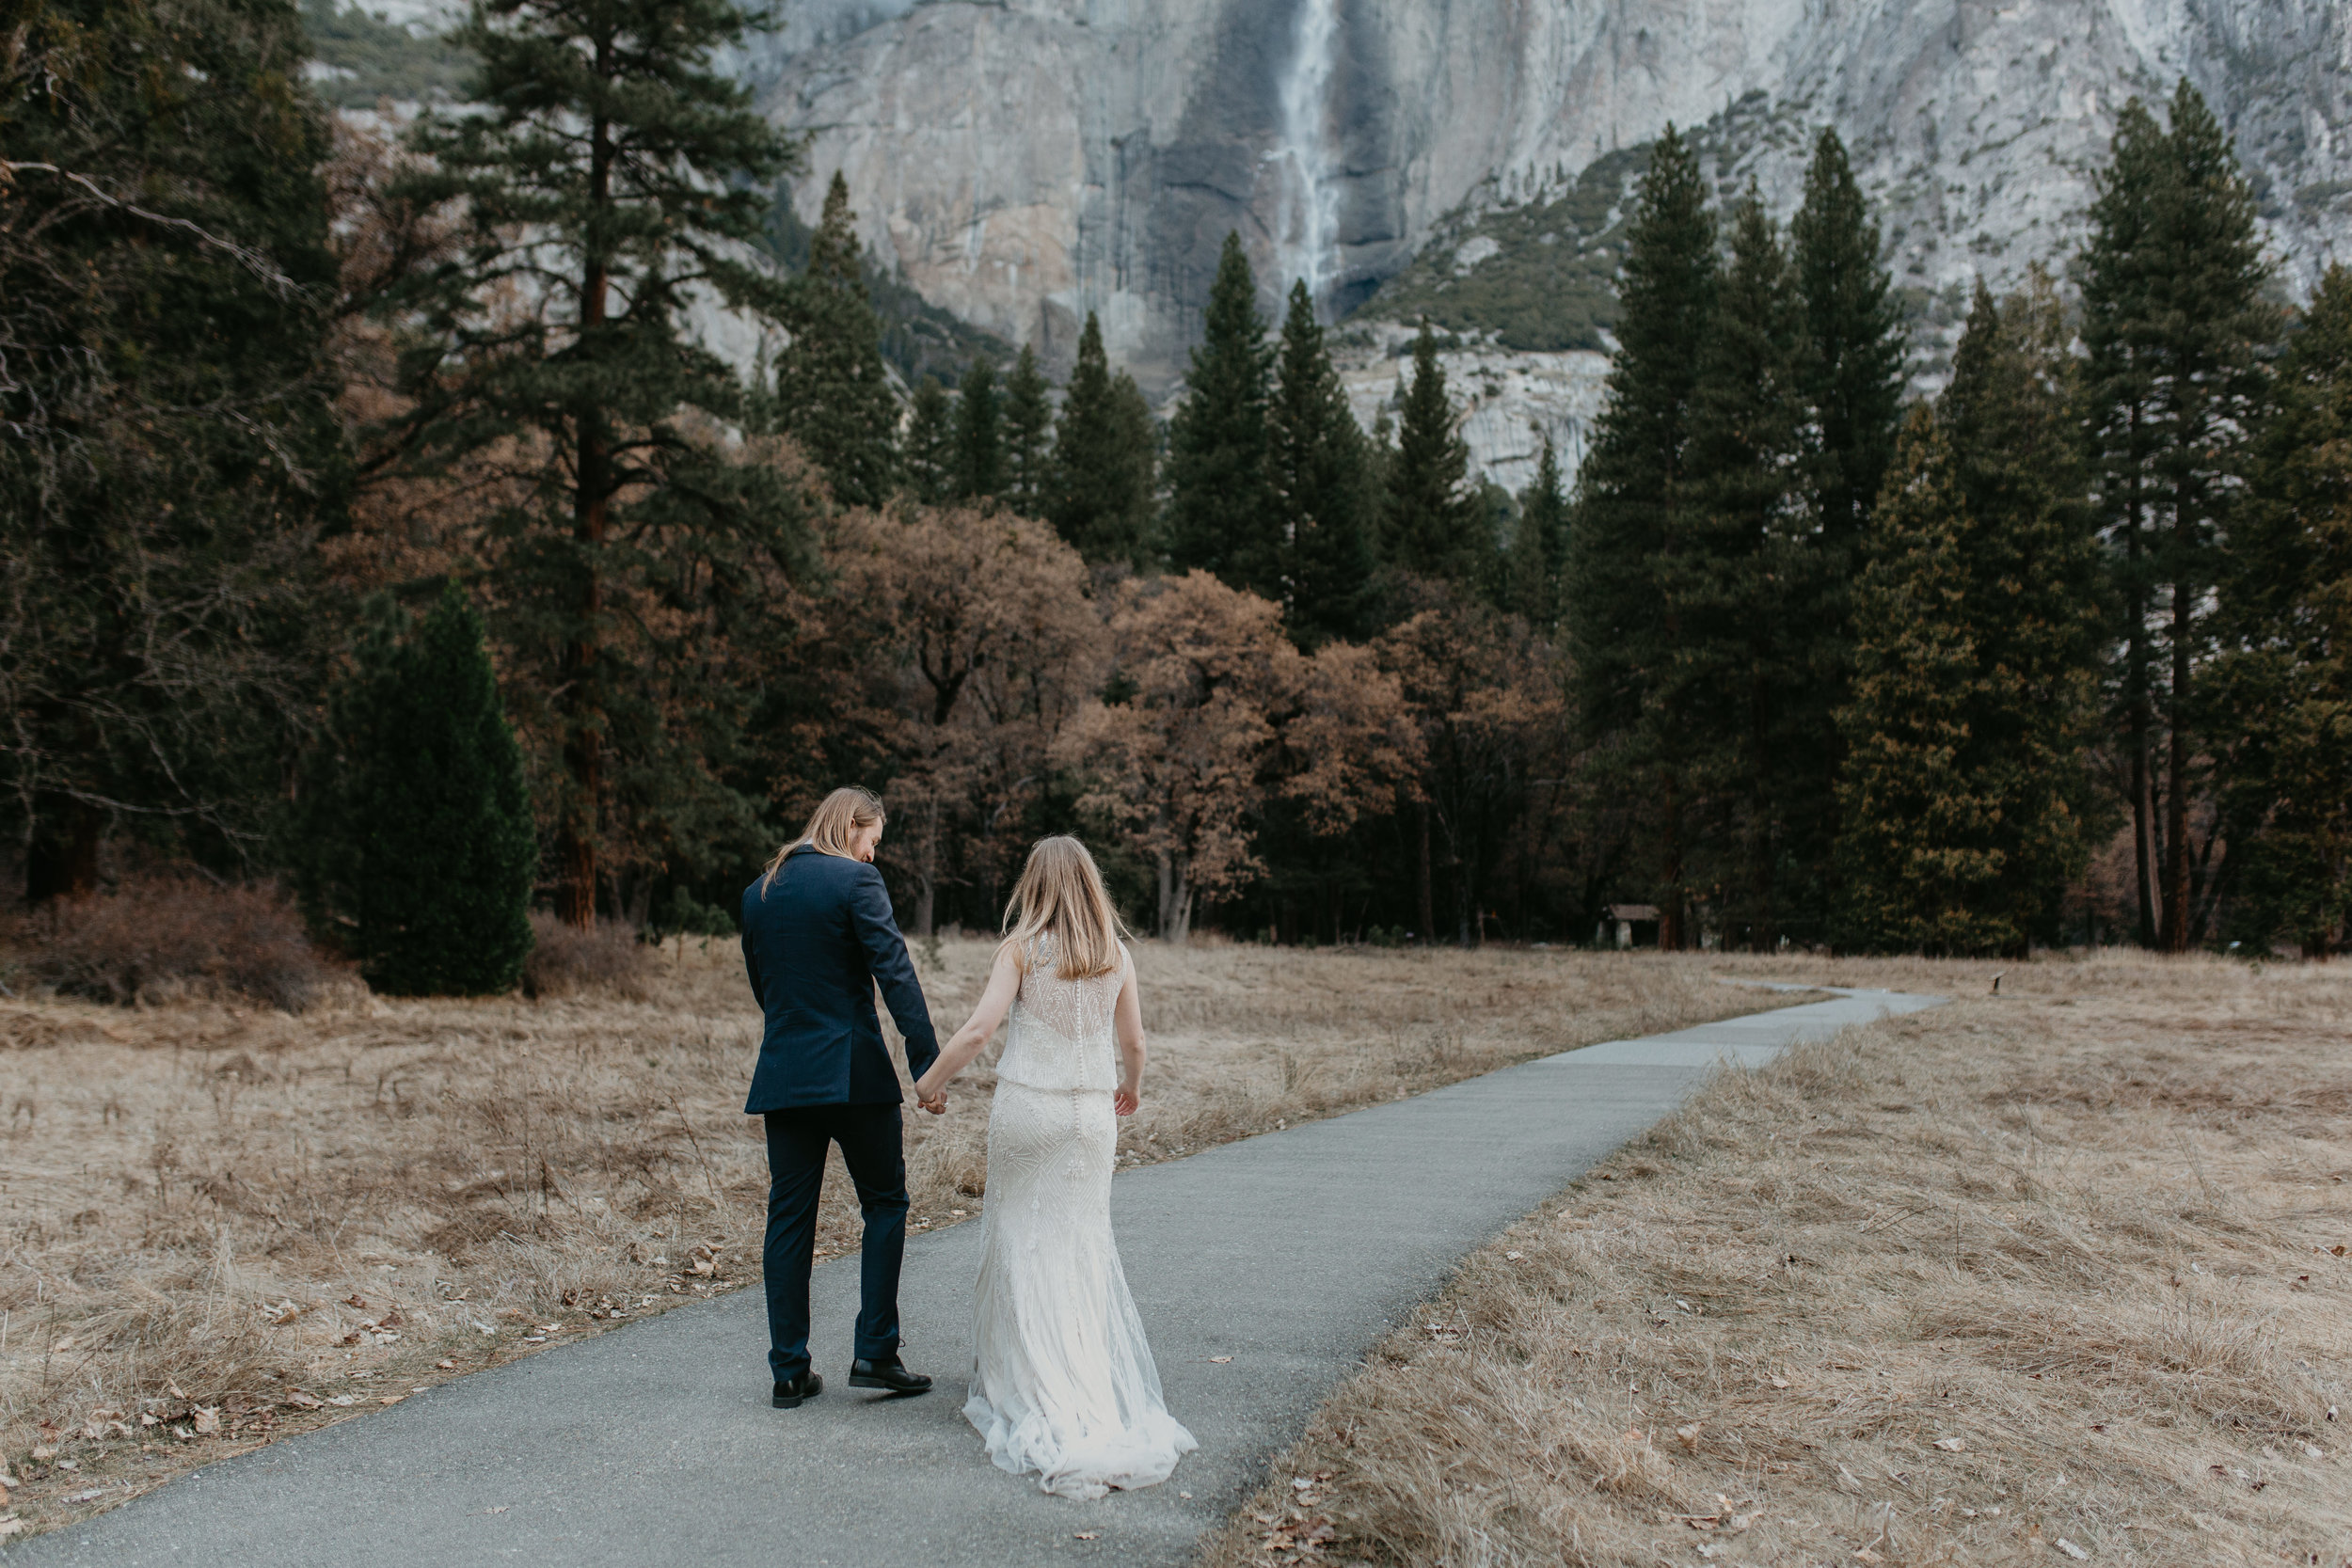 nicole-daacke-photography-yousemite-national-park-elopement-photographer-winter-cloud-moody-elope-inspiration-yosemite-valley-tunnel-view-winter-cloud-fog-weather-wedding-photos-19.jpg